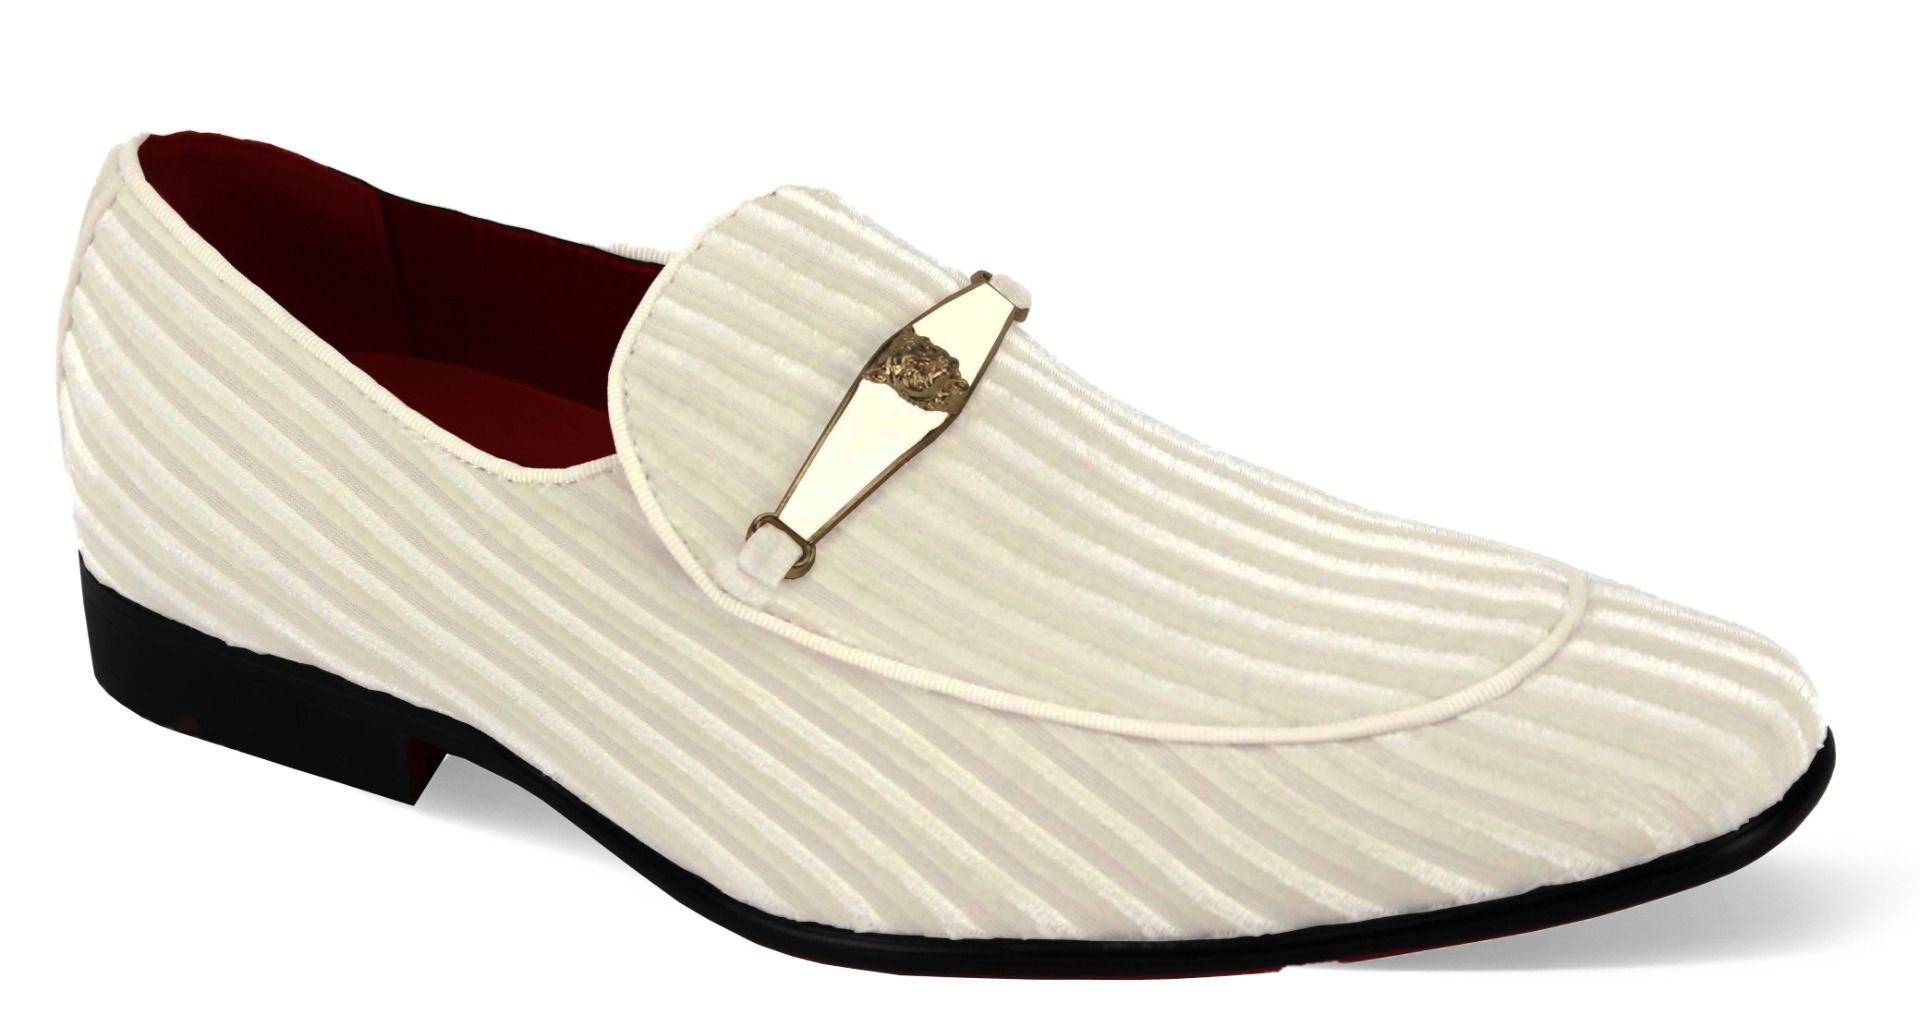 After Midnight Men's Dressy Loafers